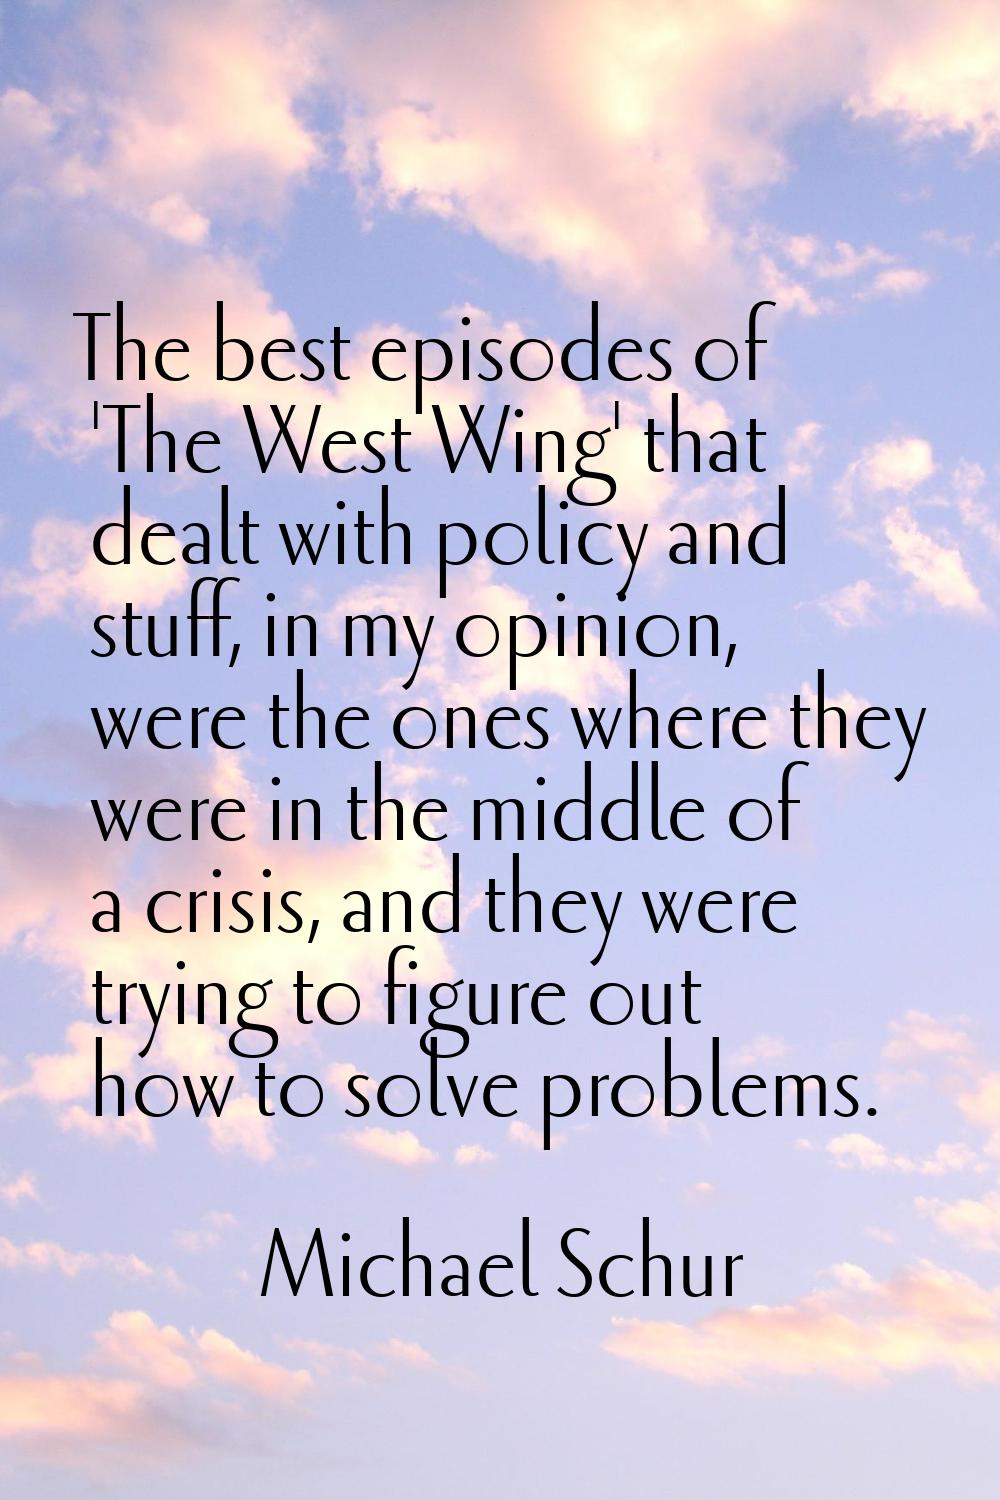 The best episodes of 'The West Wing' that dealt with policy and stuff, in my opinion, were the ones